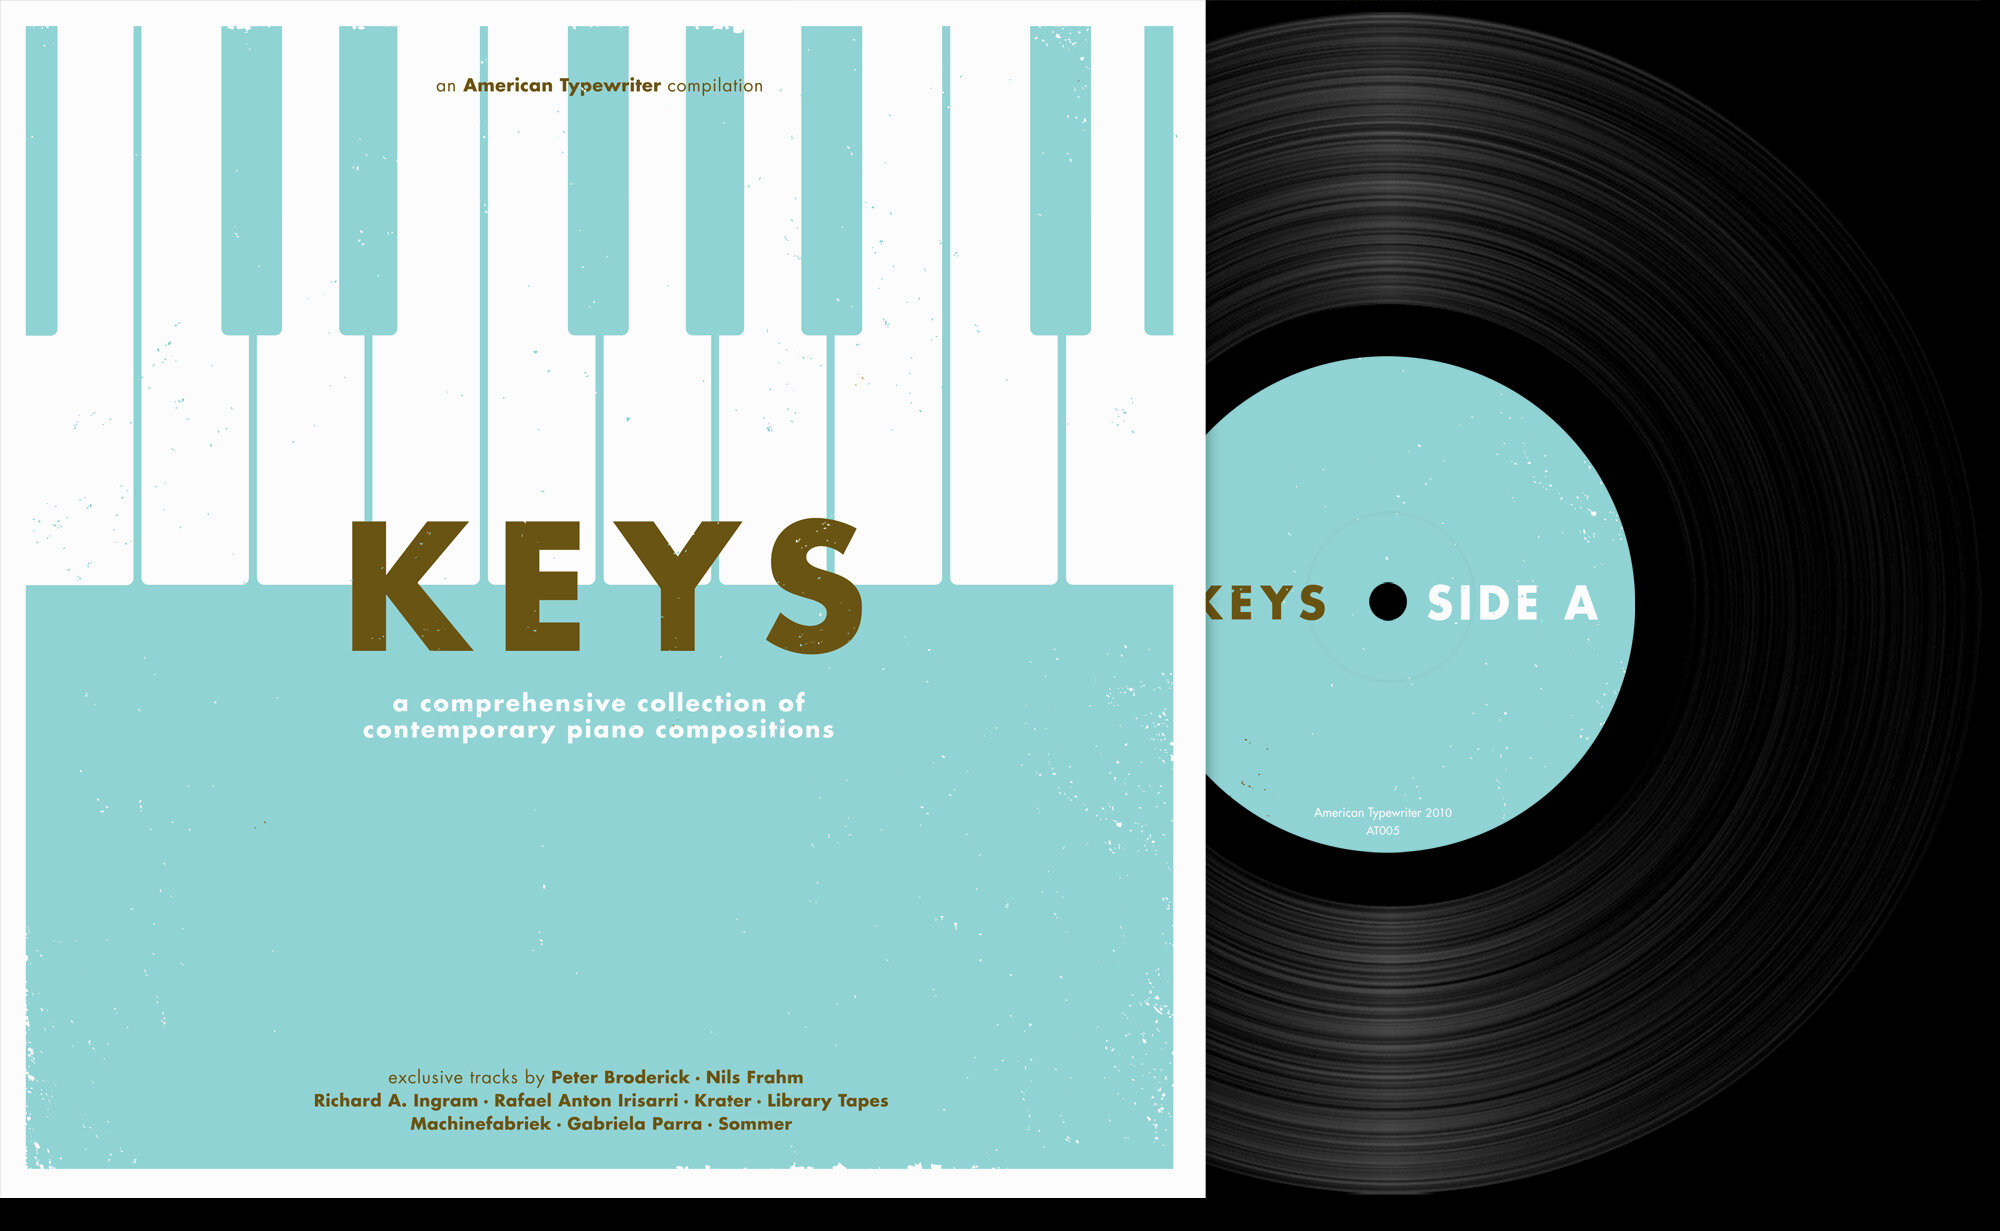  lp front cover – Keys compilation American Typewriter, 2010 